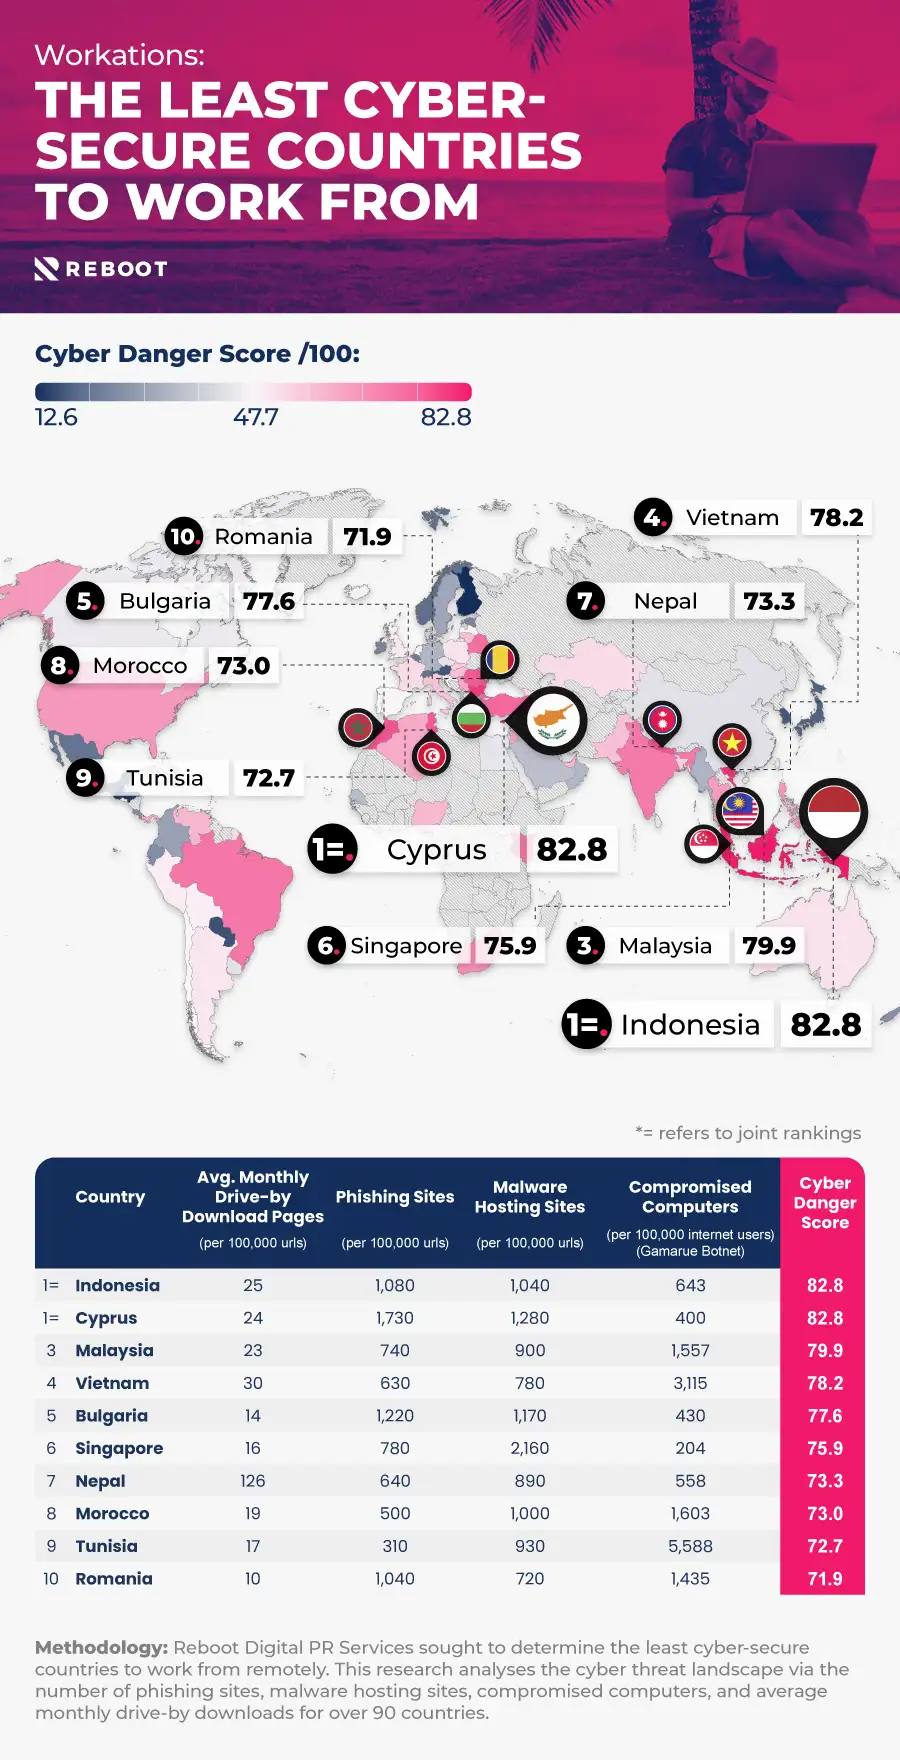 The least cyber-secure countries to work from